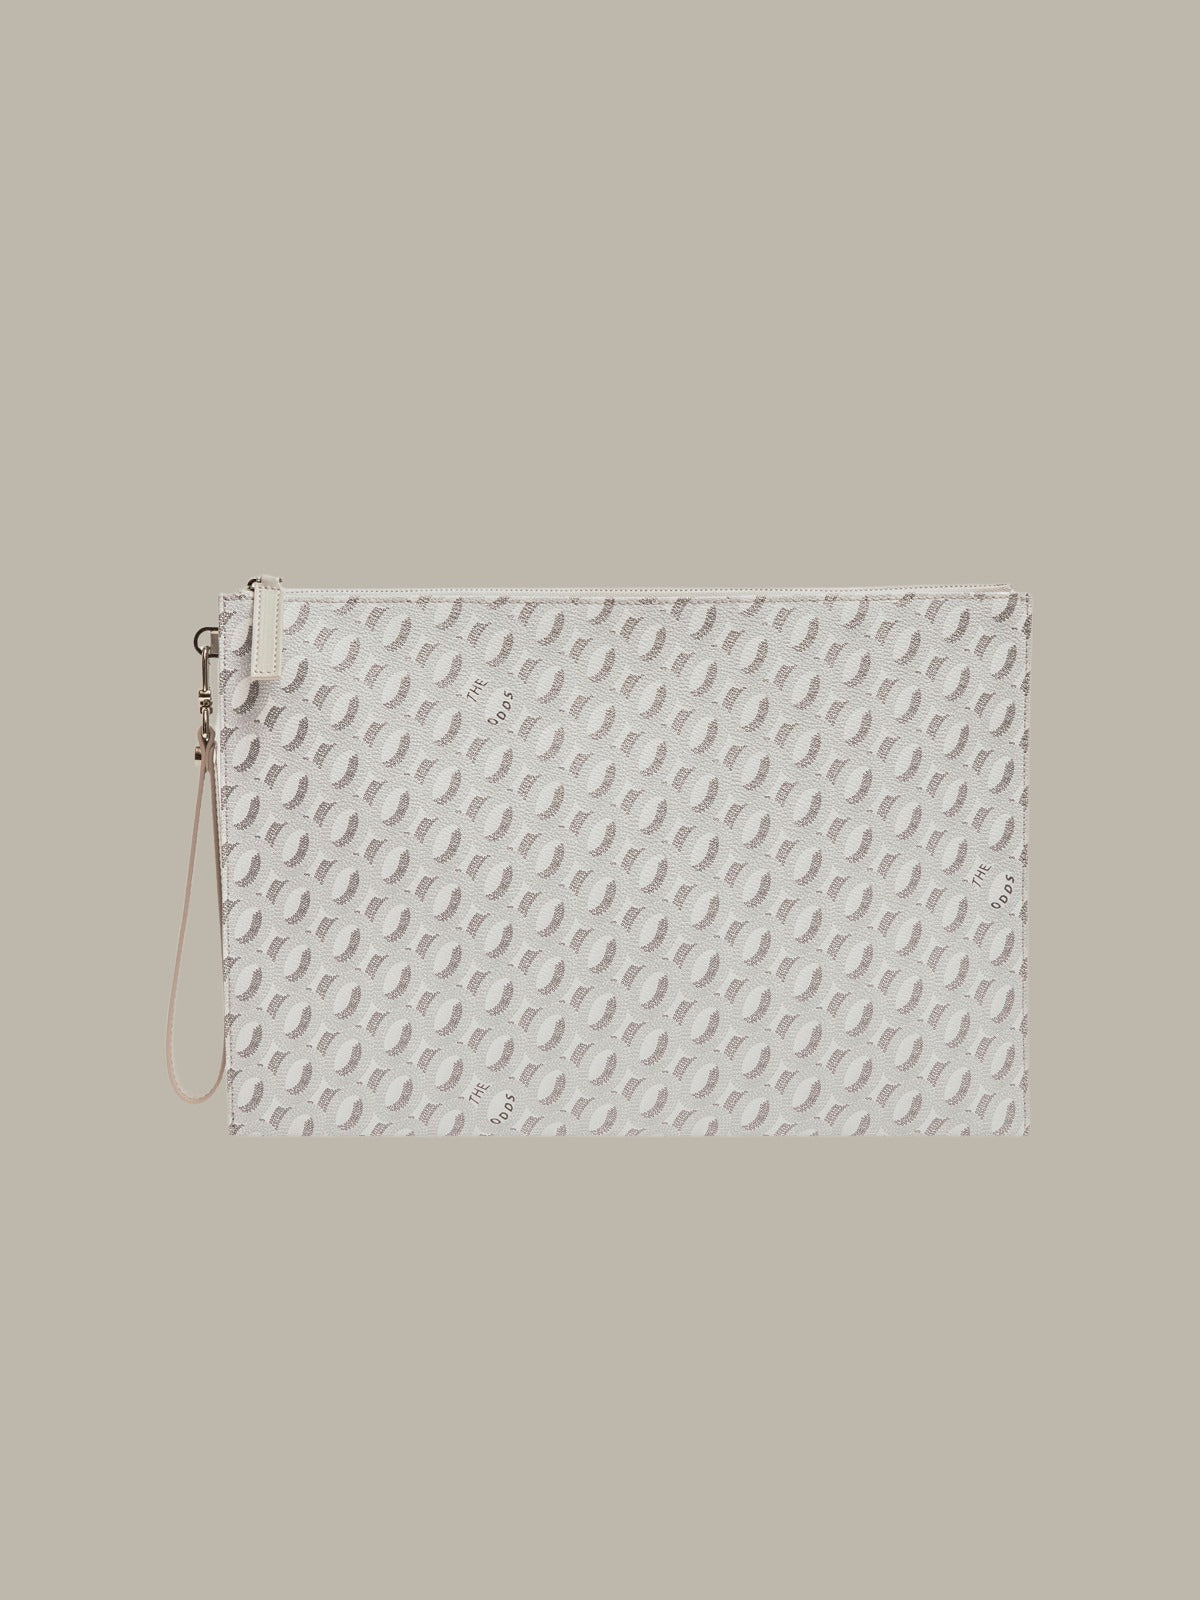 Unlmtd Odds Universal Pouch Size L Marble White-Grey/ LMTD edition